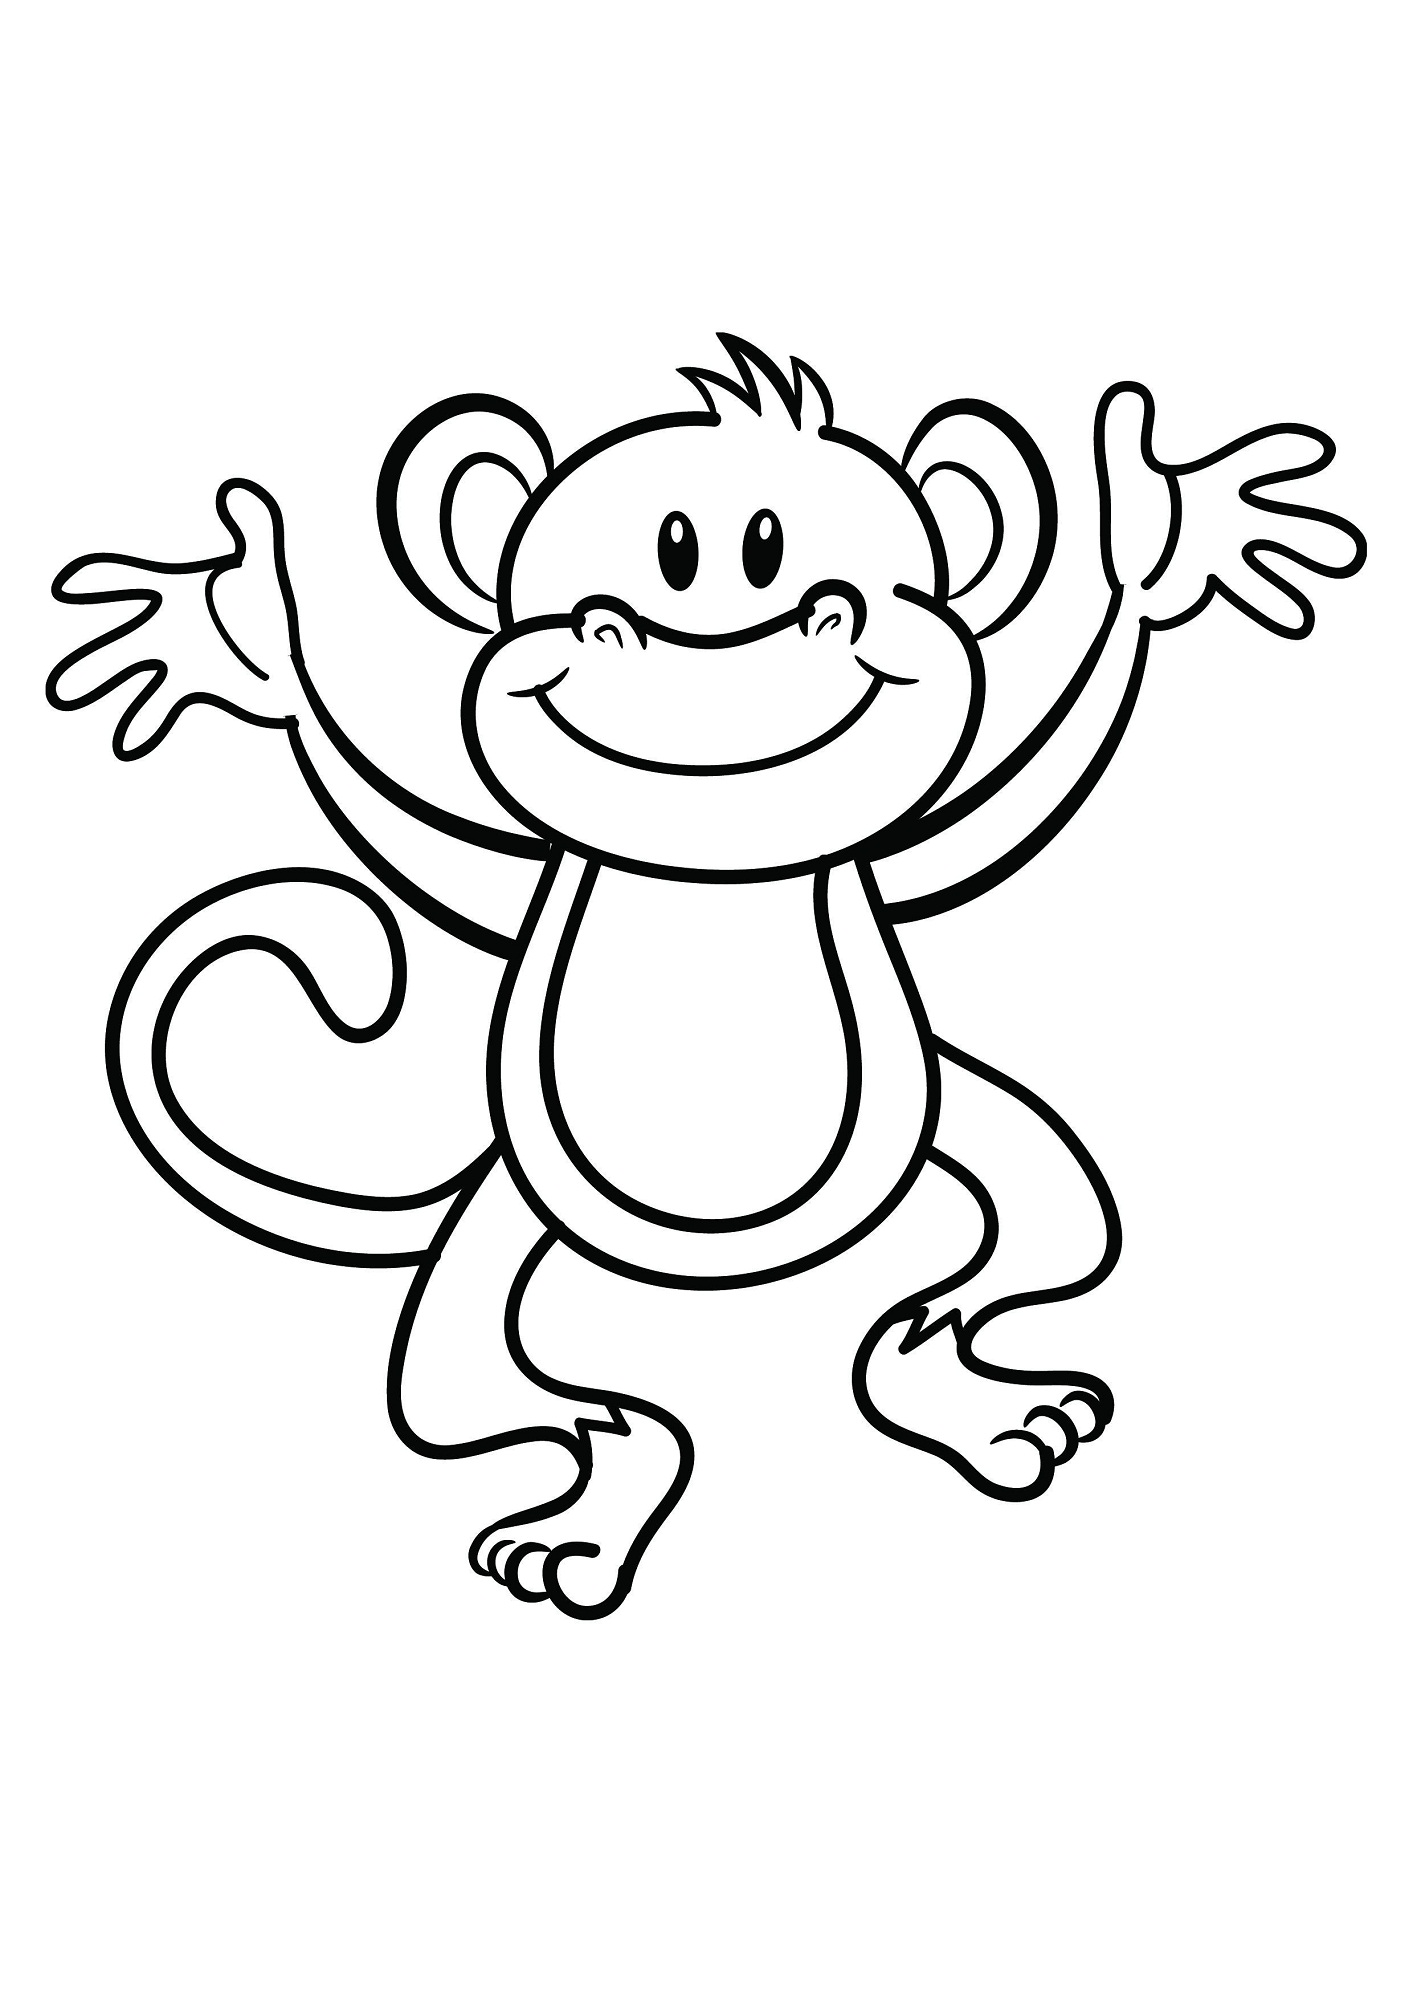 coloring pages of monkeys easy